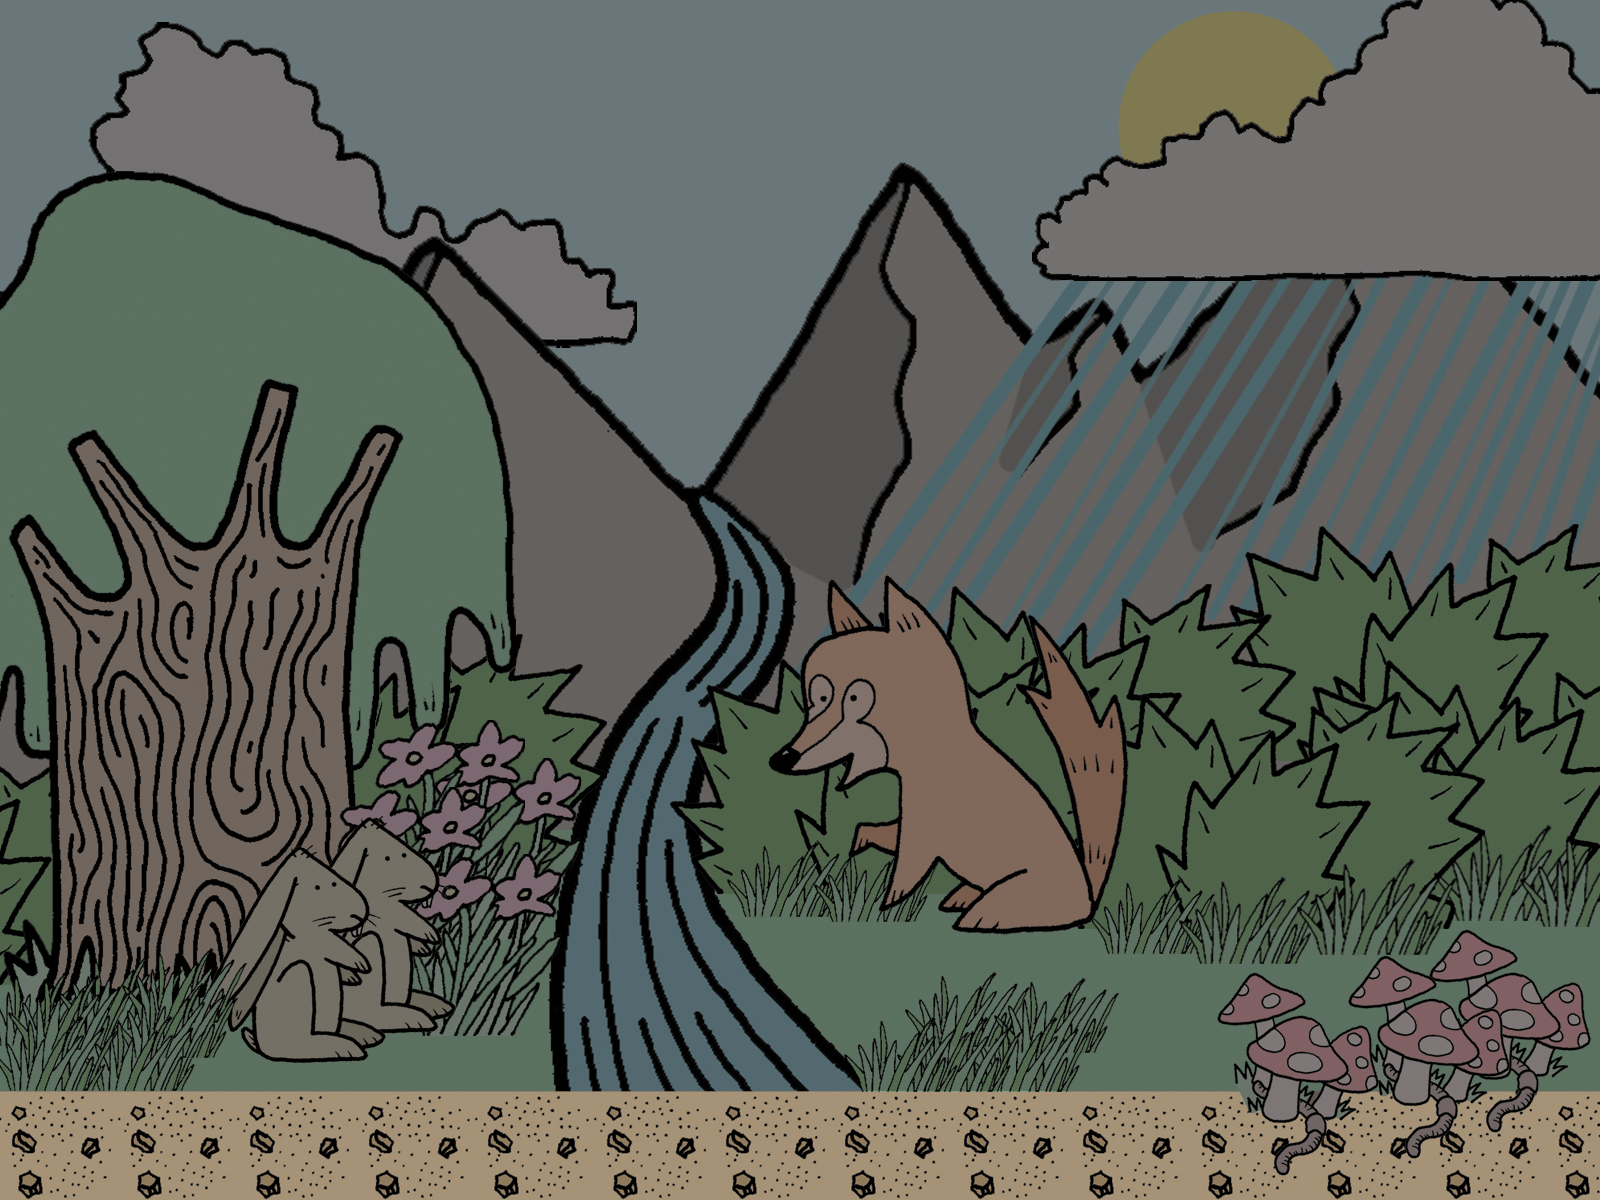 Cartoon representation of a forest with plants and animals, highlighting an analogy between soil and writing program goals and outcomes.